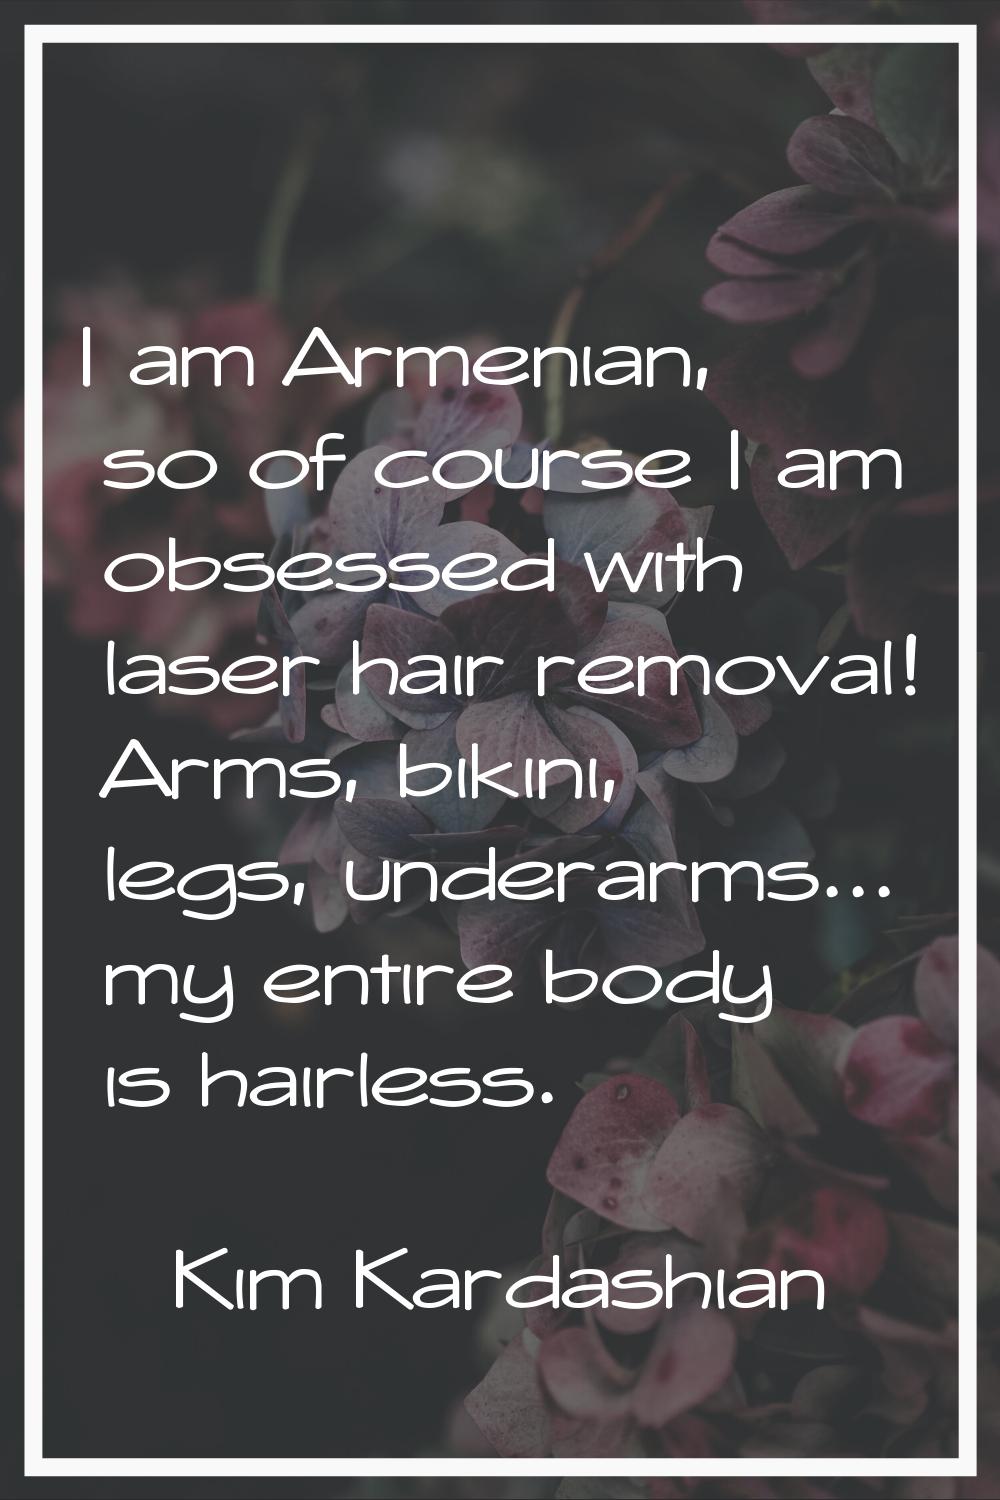 I am Armenian, so of course I am obsessed with laser hair removal! Arms, bikini, legs, underarms...